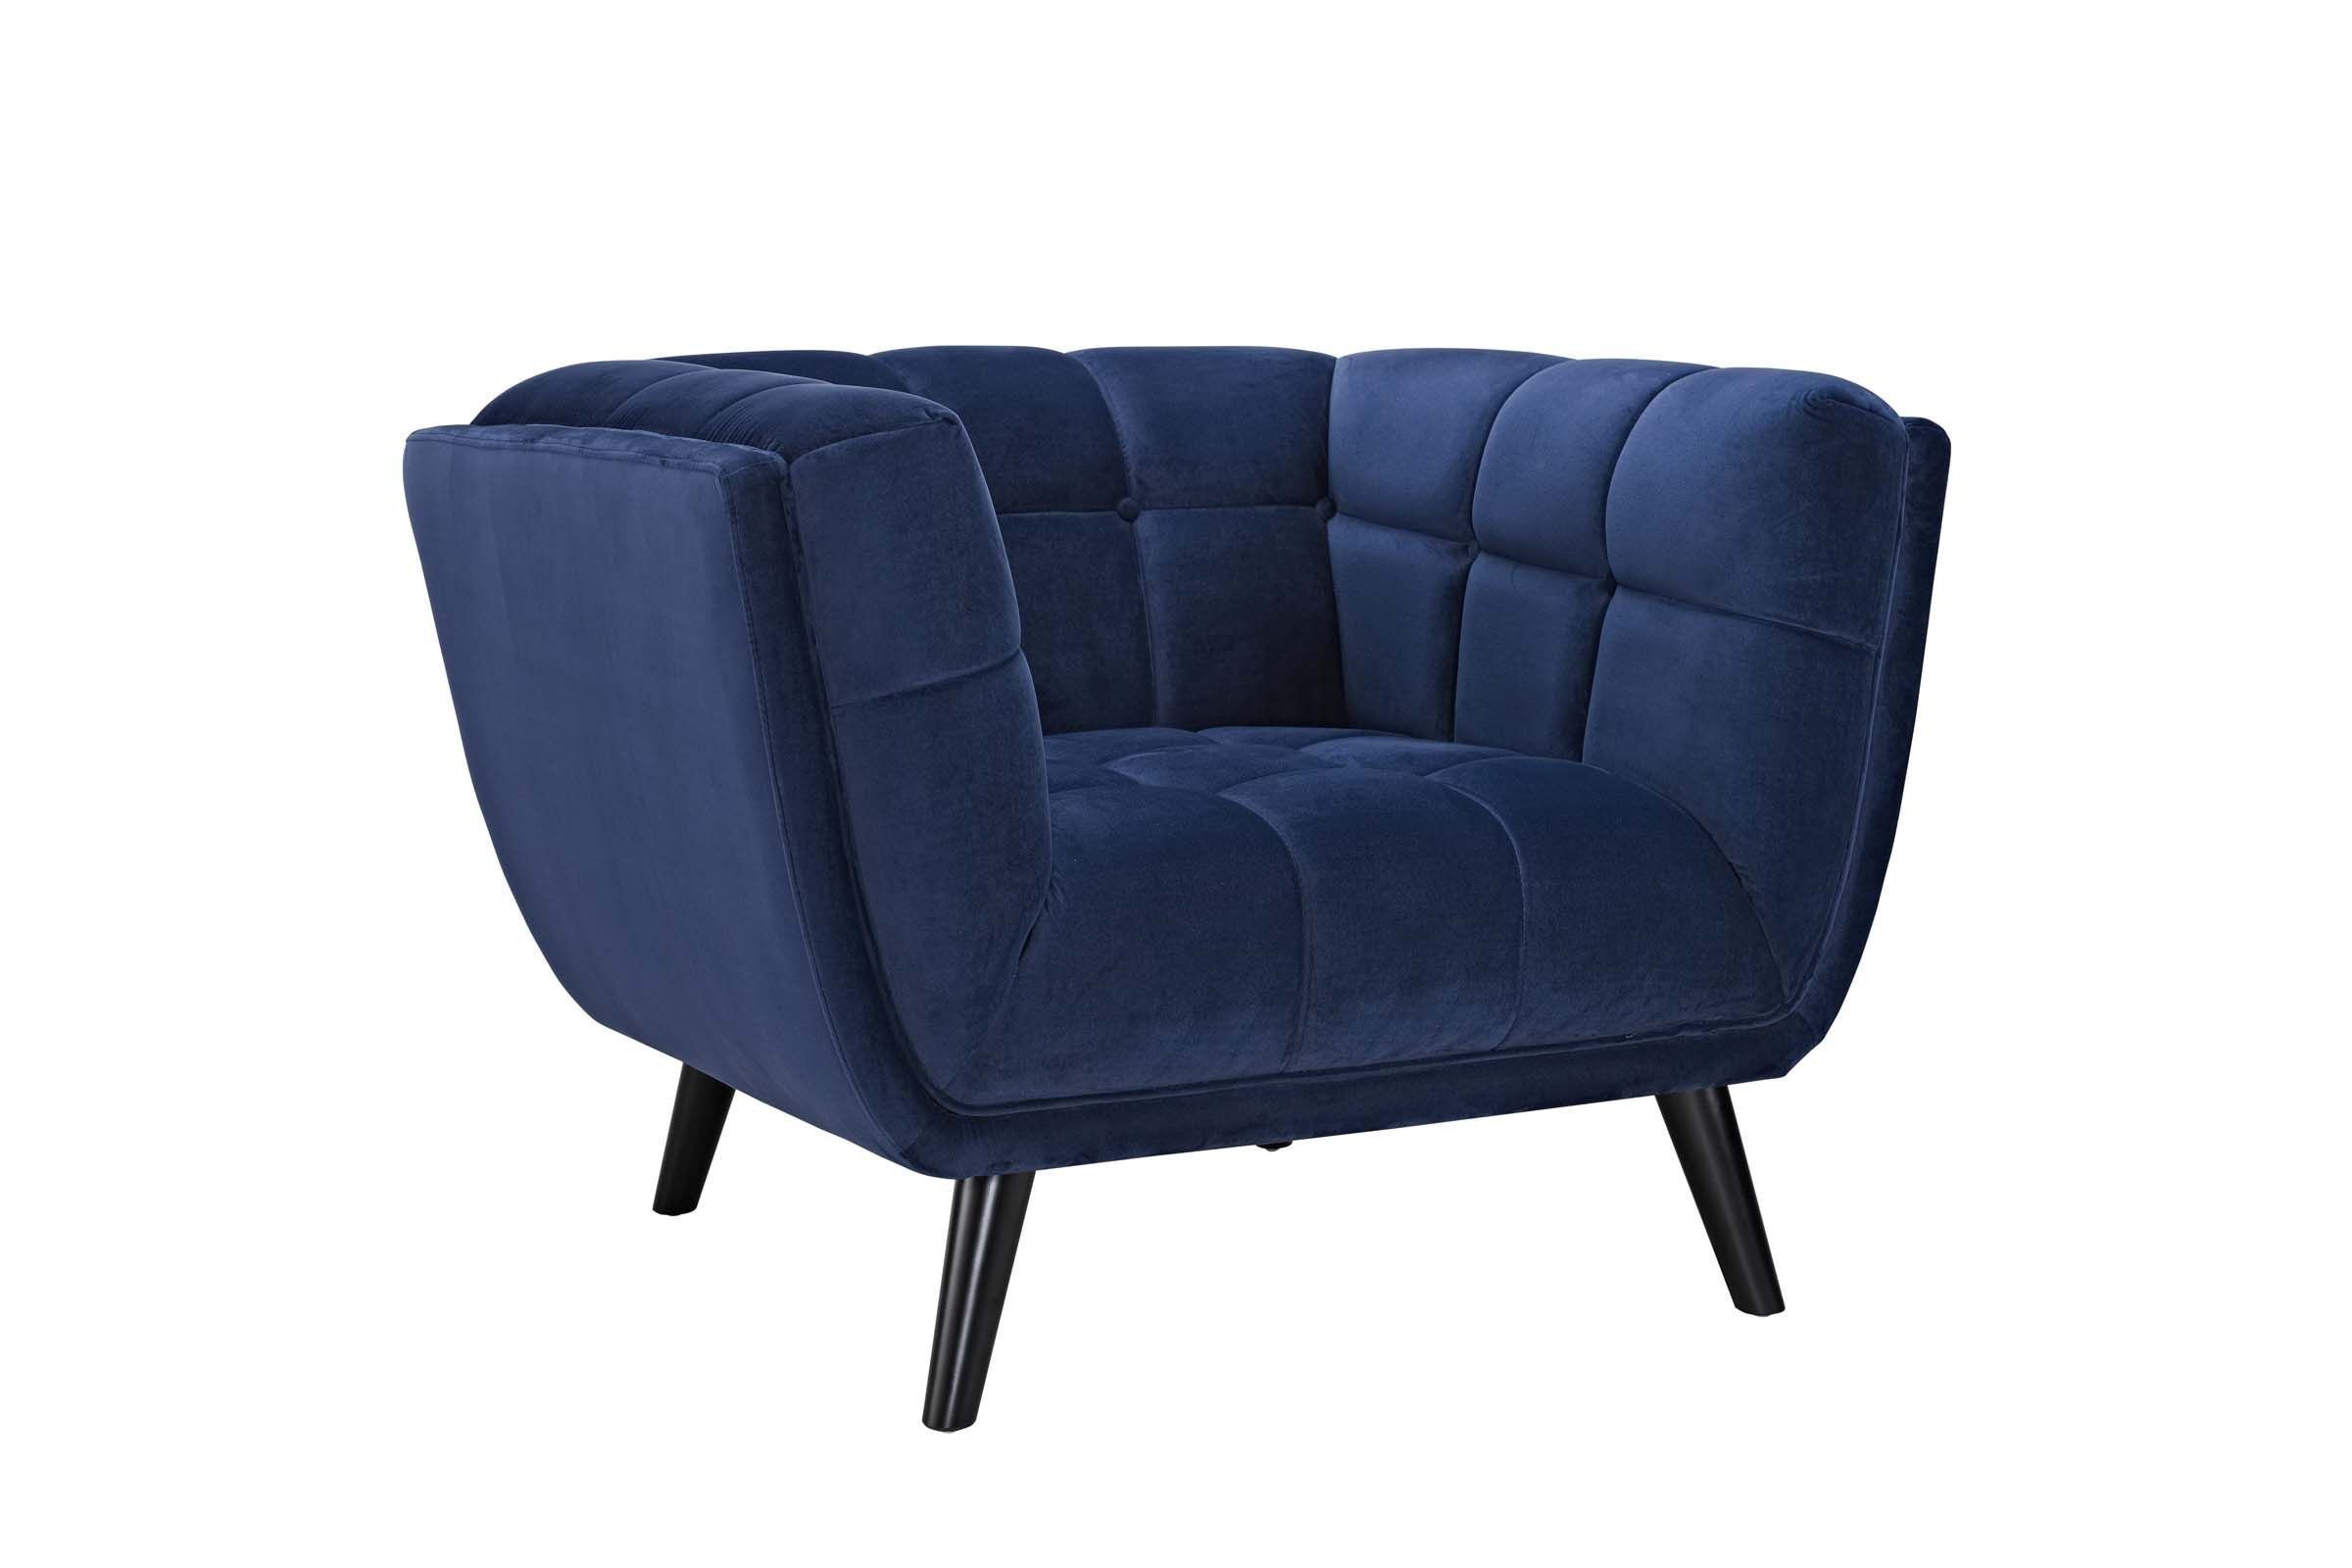 Small Comfy Chair for Bedroom Lovely Bestow Velvet Armchair In Navy by Modway In 2019